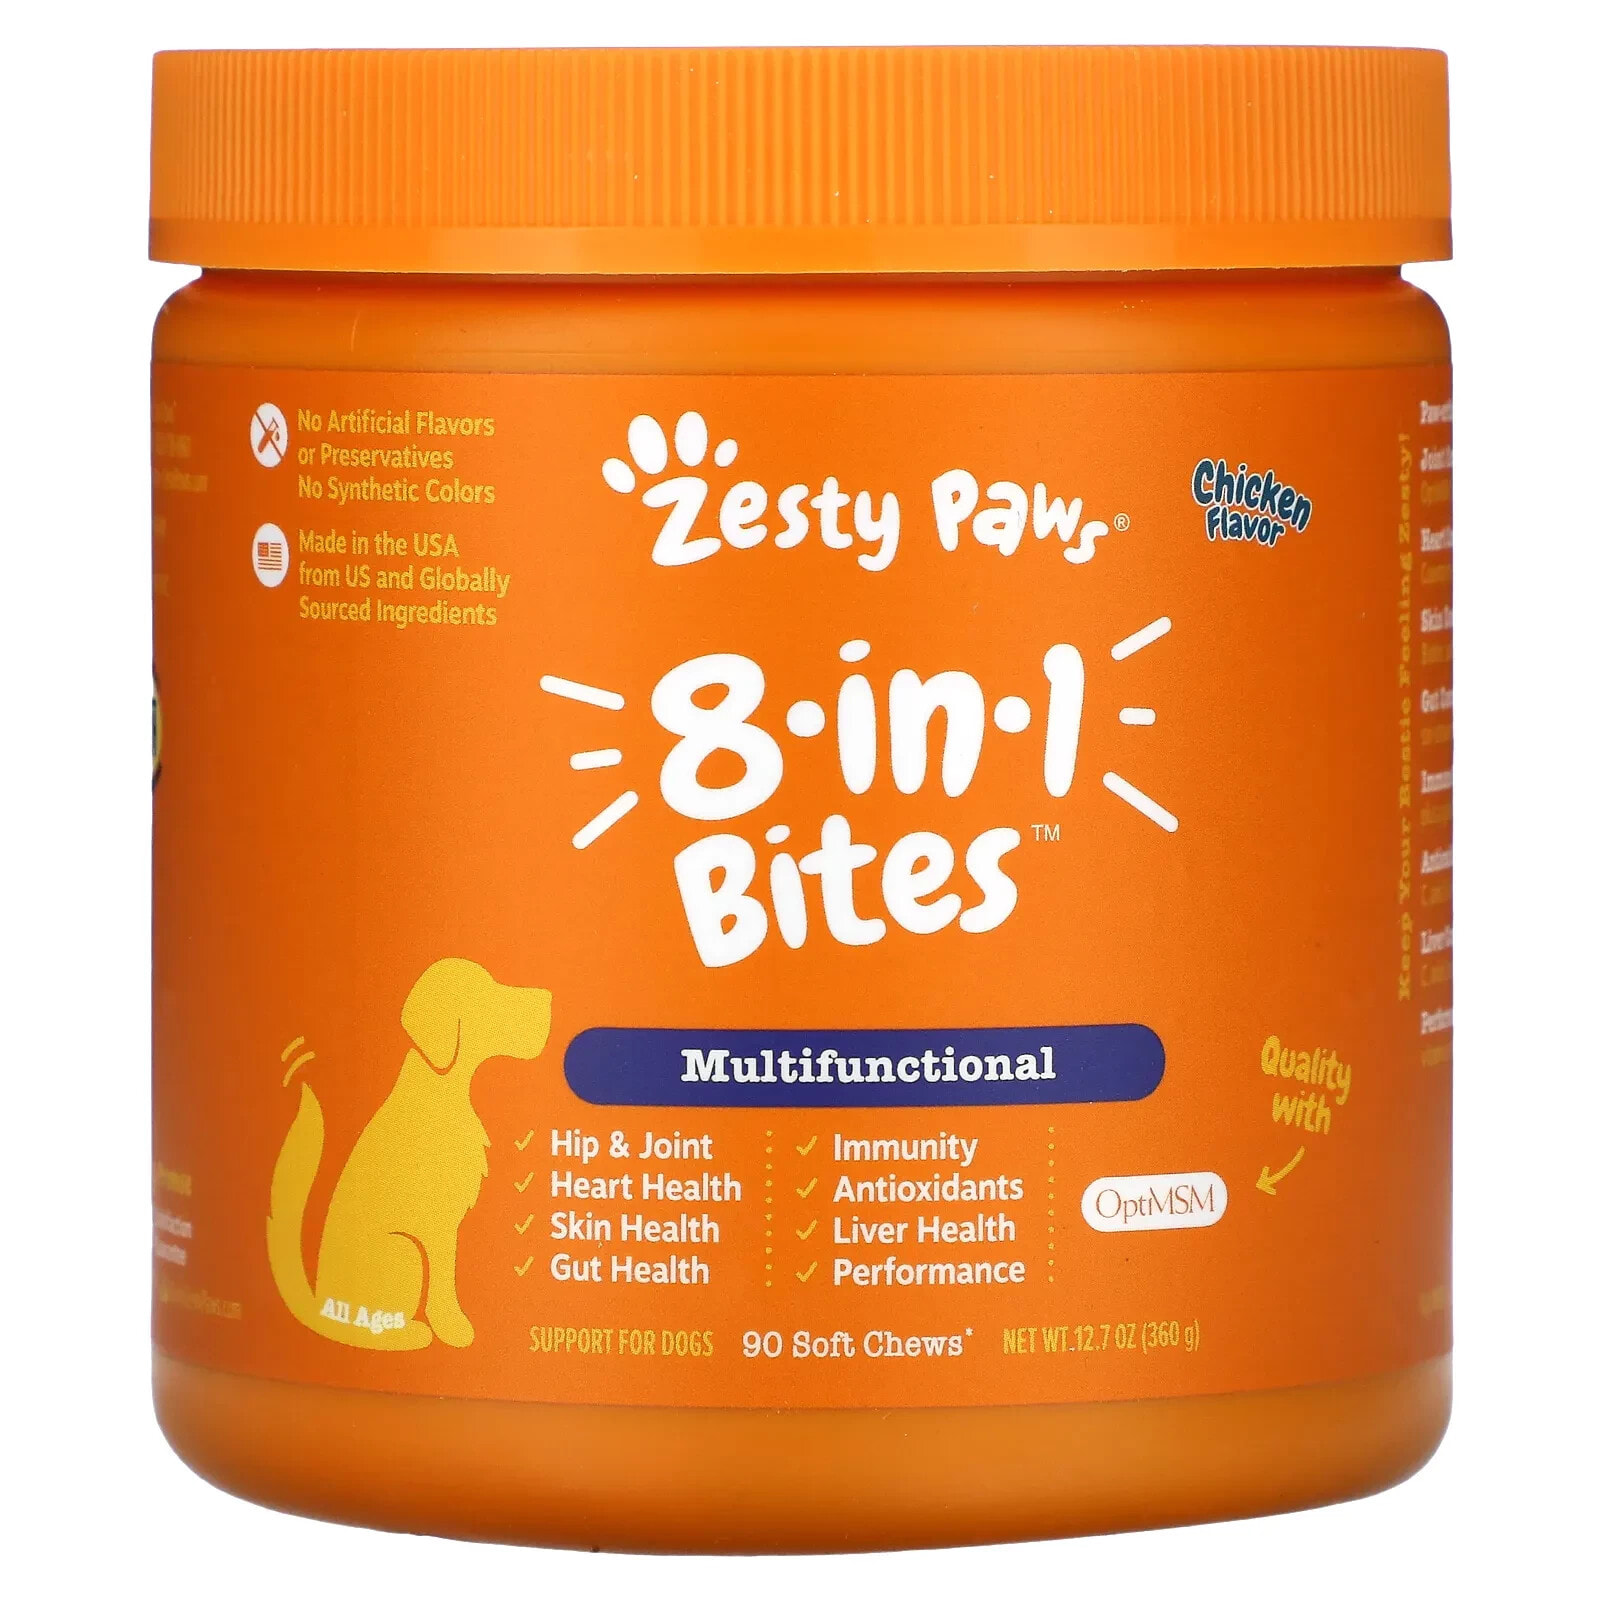 Zesty Paws, 8-in-1 Bites for Dogs, Multifunctional, All Ages, Chicken, 90 Soft Chews, 12.7 oz (360 g)